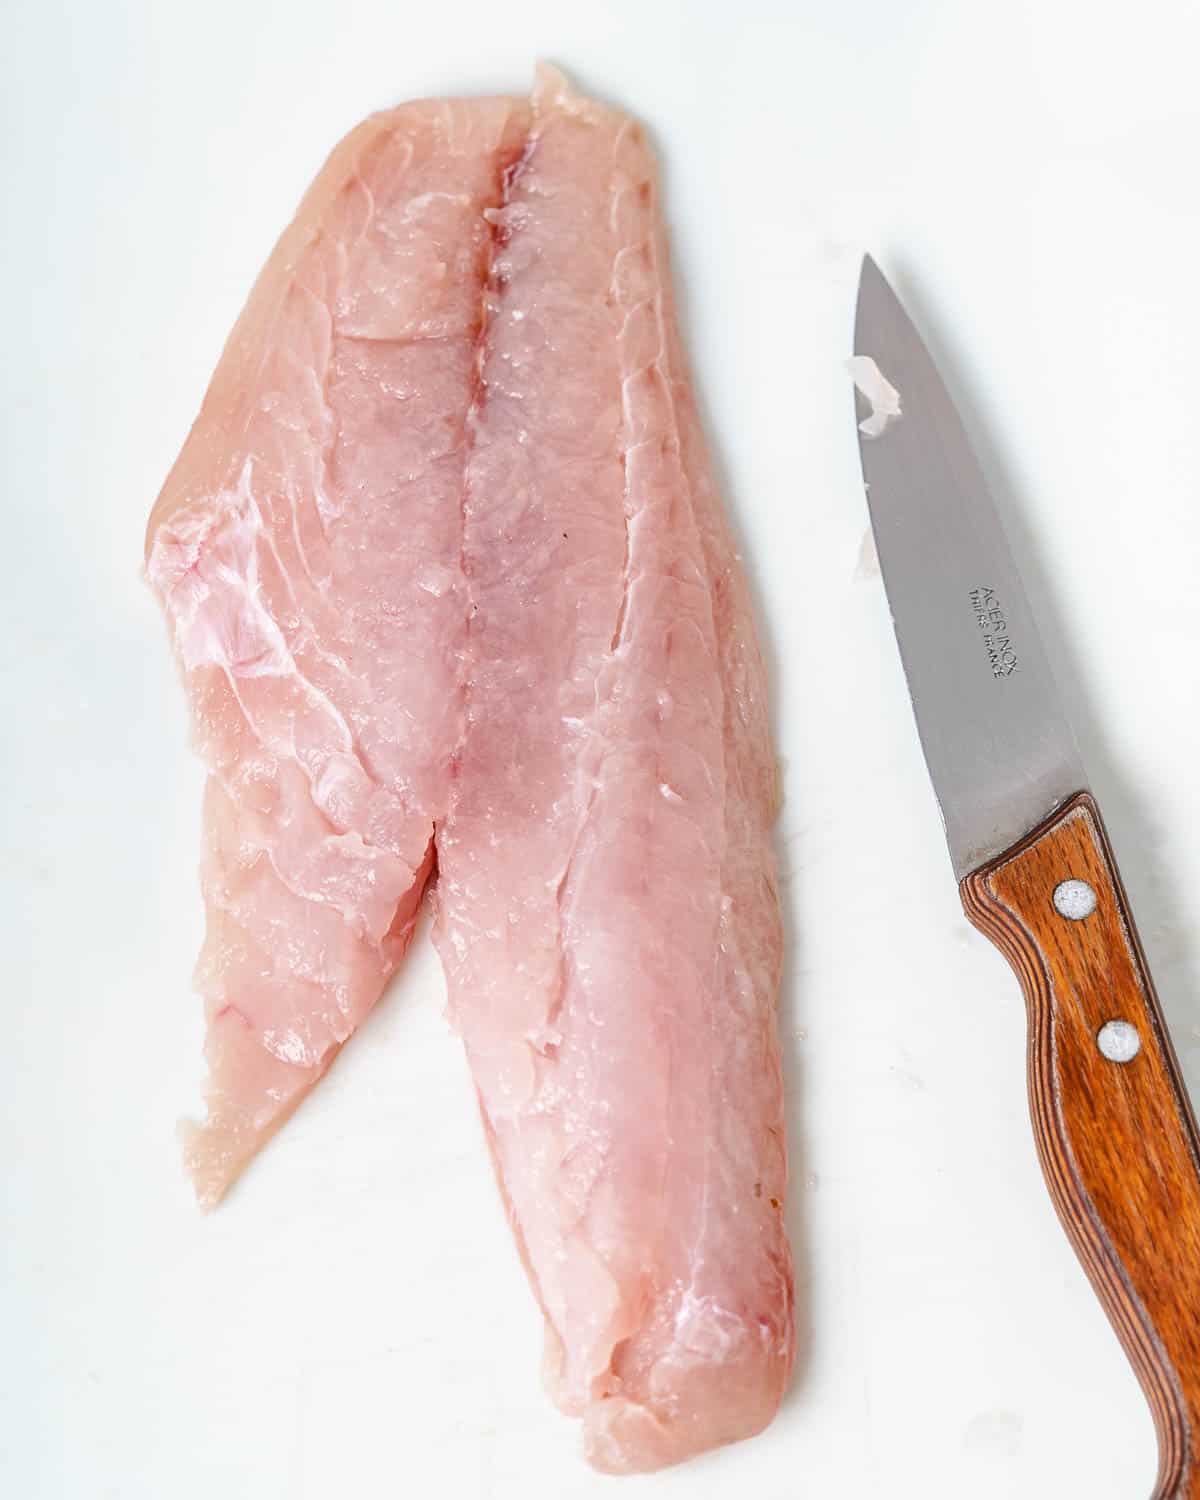 Fresh yellowtail with paring knife.